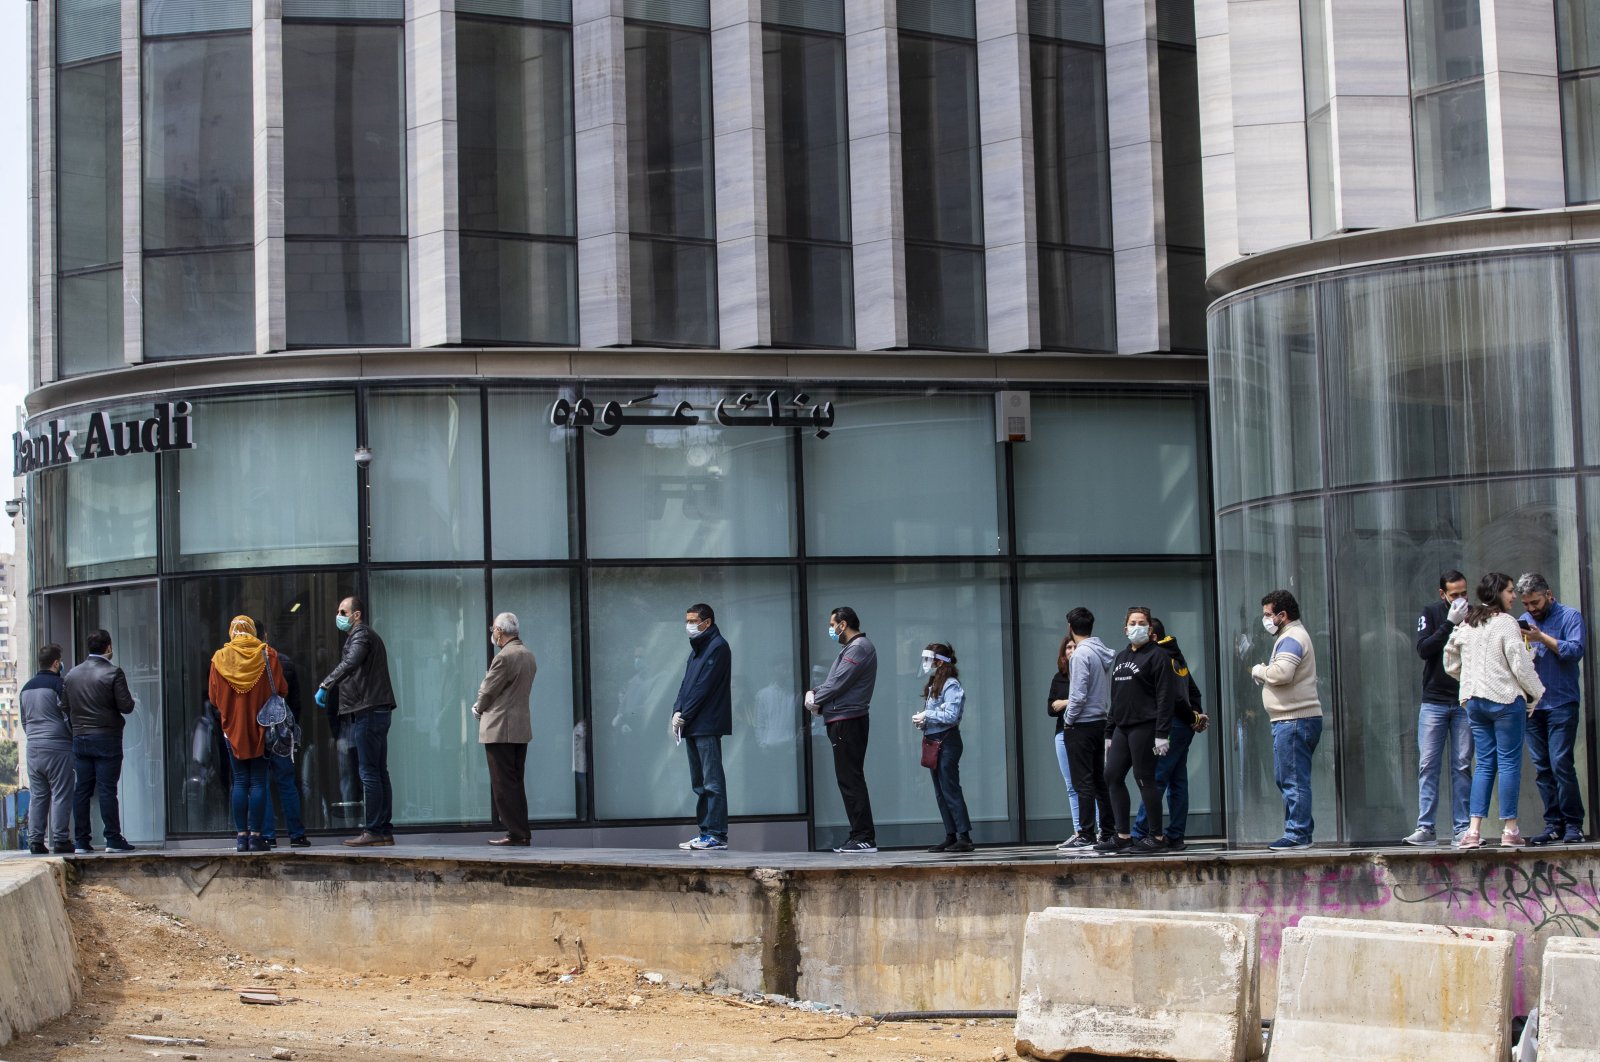 Clients wearing masks to help protect themselves from the coronavirus wait to use ATM machines outside a closed bank in Beirut, Lebanon, Saturday, March 28, 2020. (AP Photo)